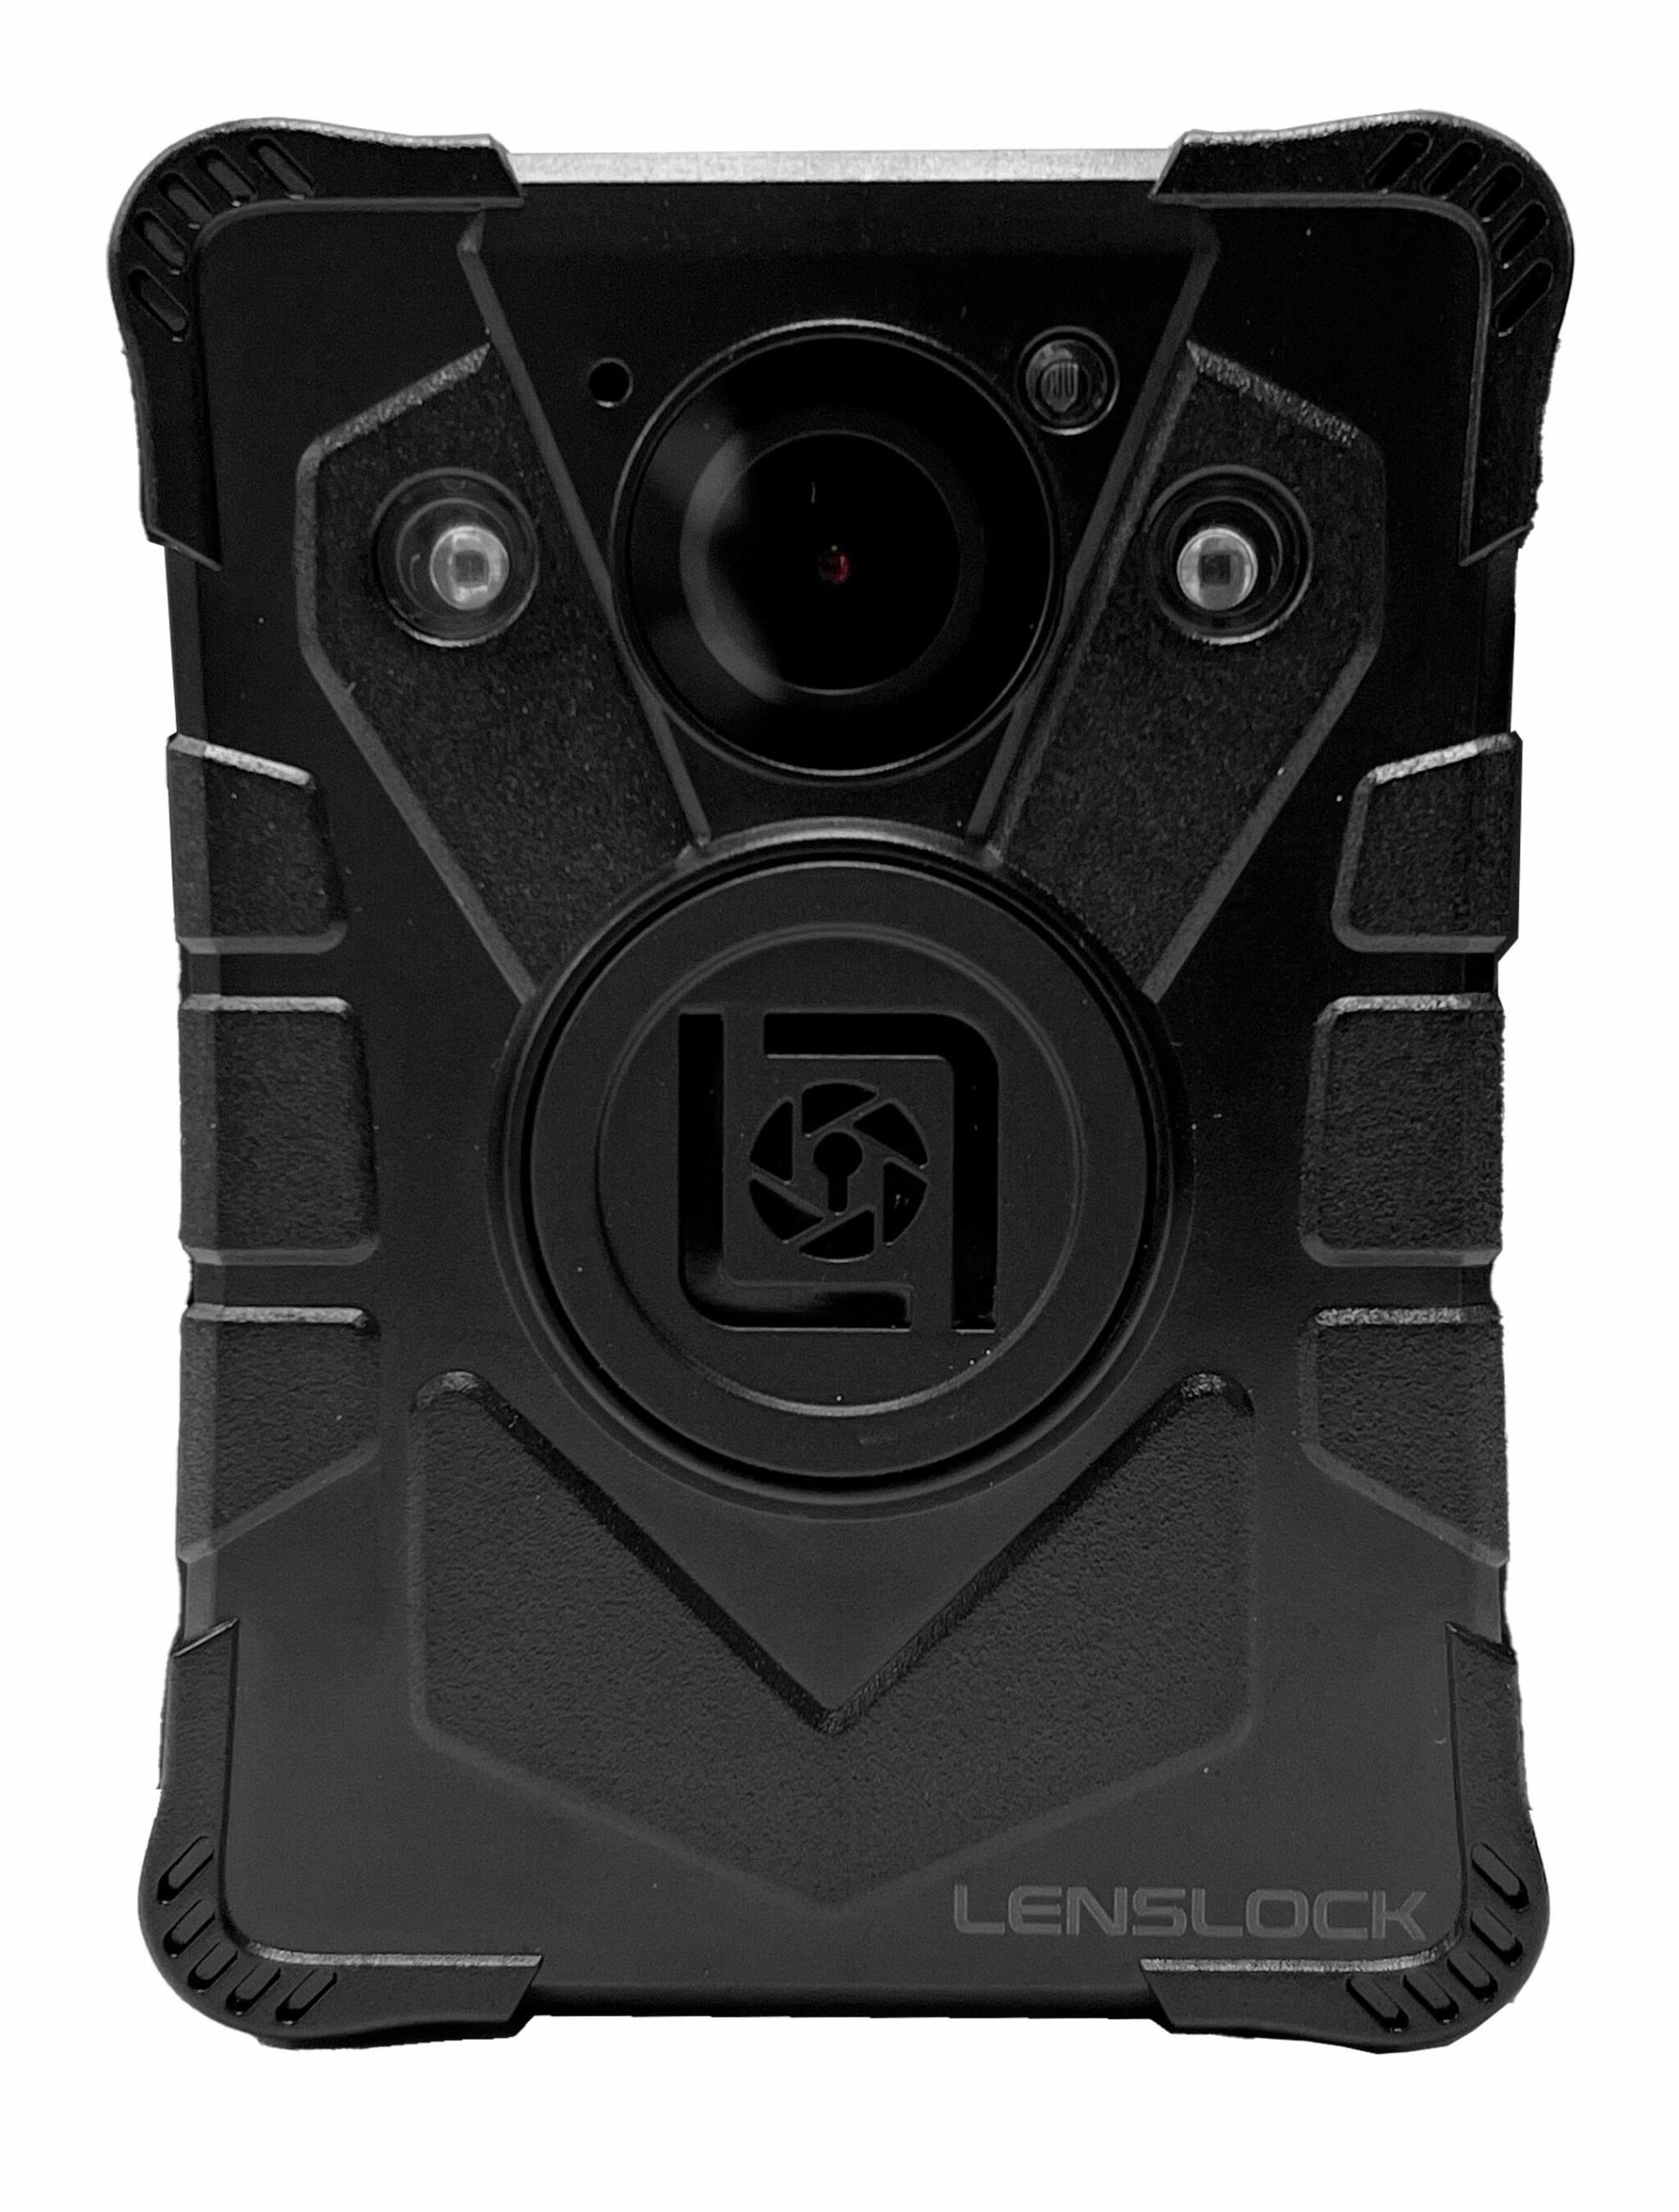 Photo courtesy LensLock/ Sequim Police Department plans to purchase 20 body-worn cameras from LensLock for five years along with dash mounted cameras for each vehicle by end of the year.